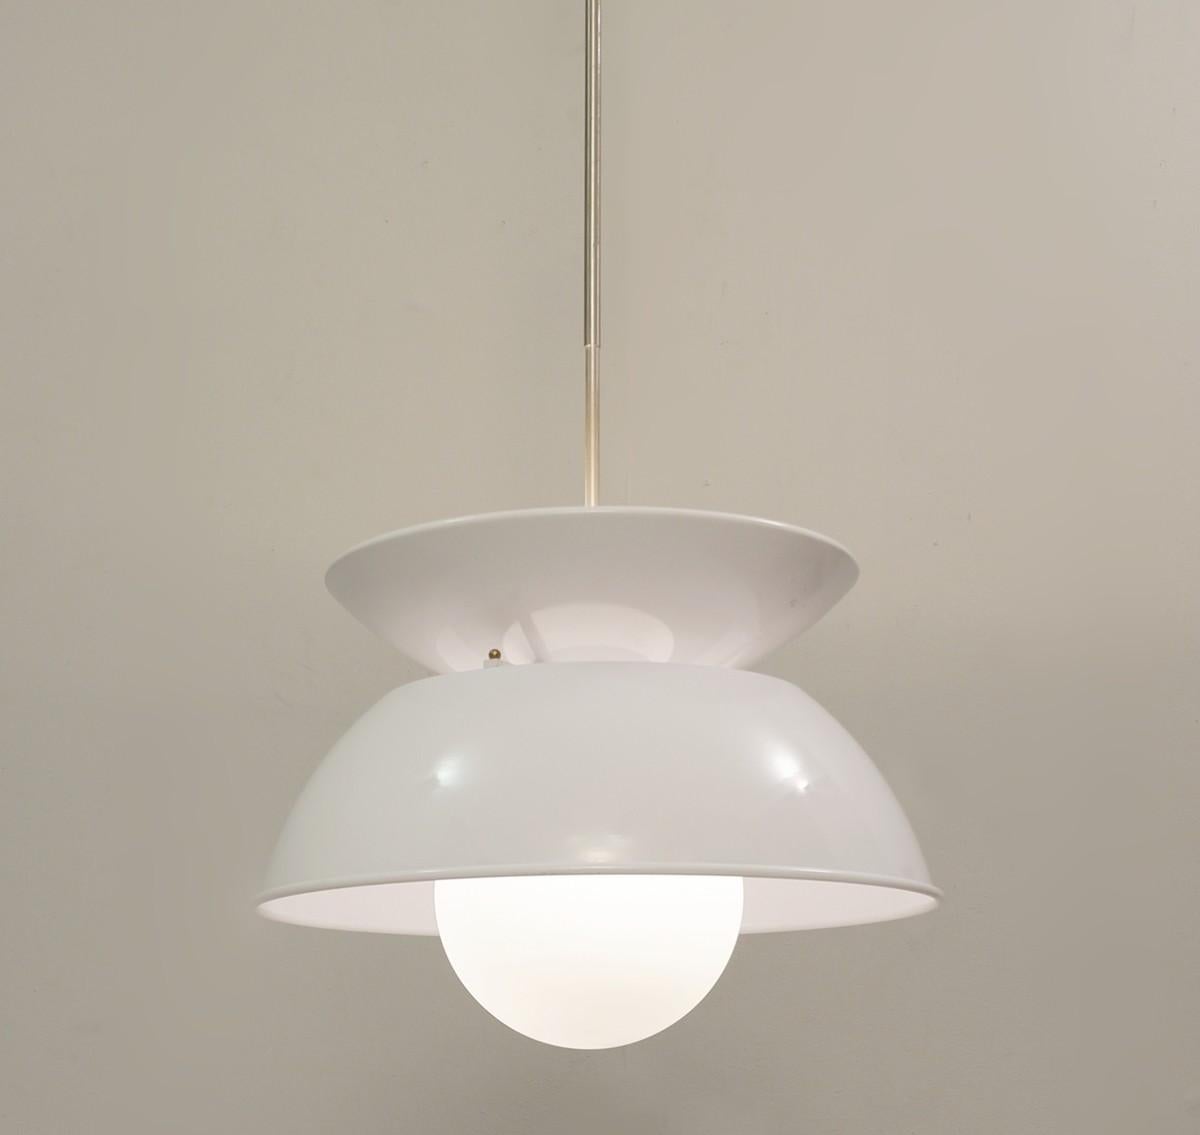 'Cetra' Hanging Lamp by Vico Magistretti for Artemide, 1960s For Sale 1